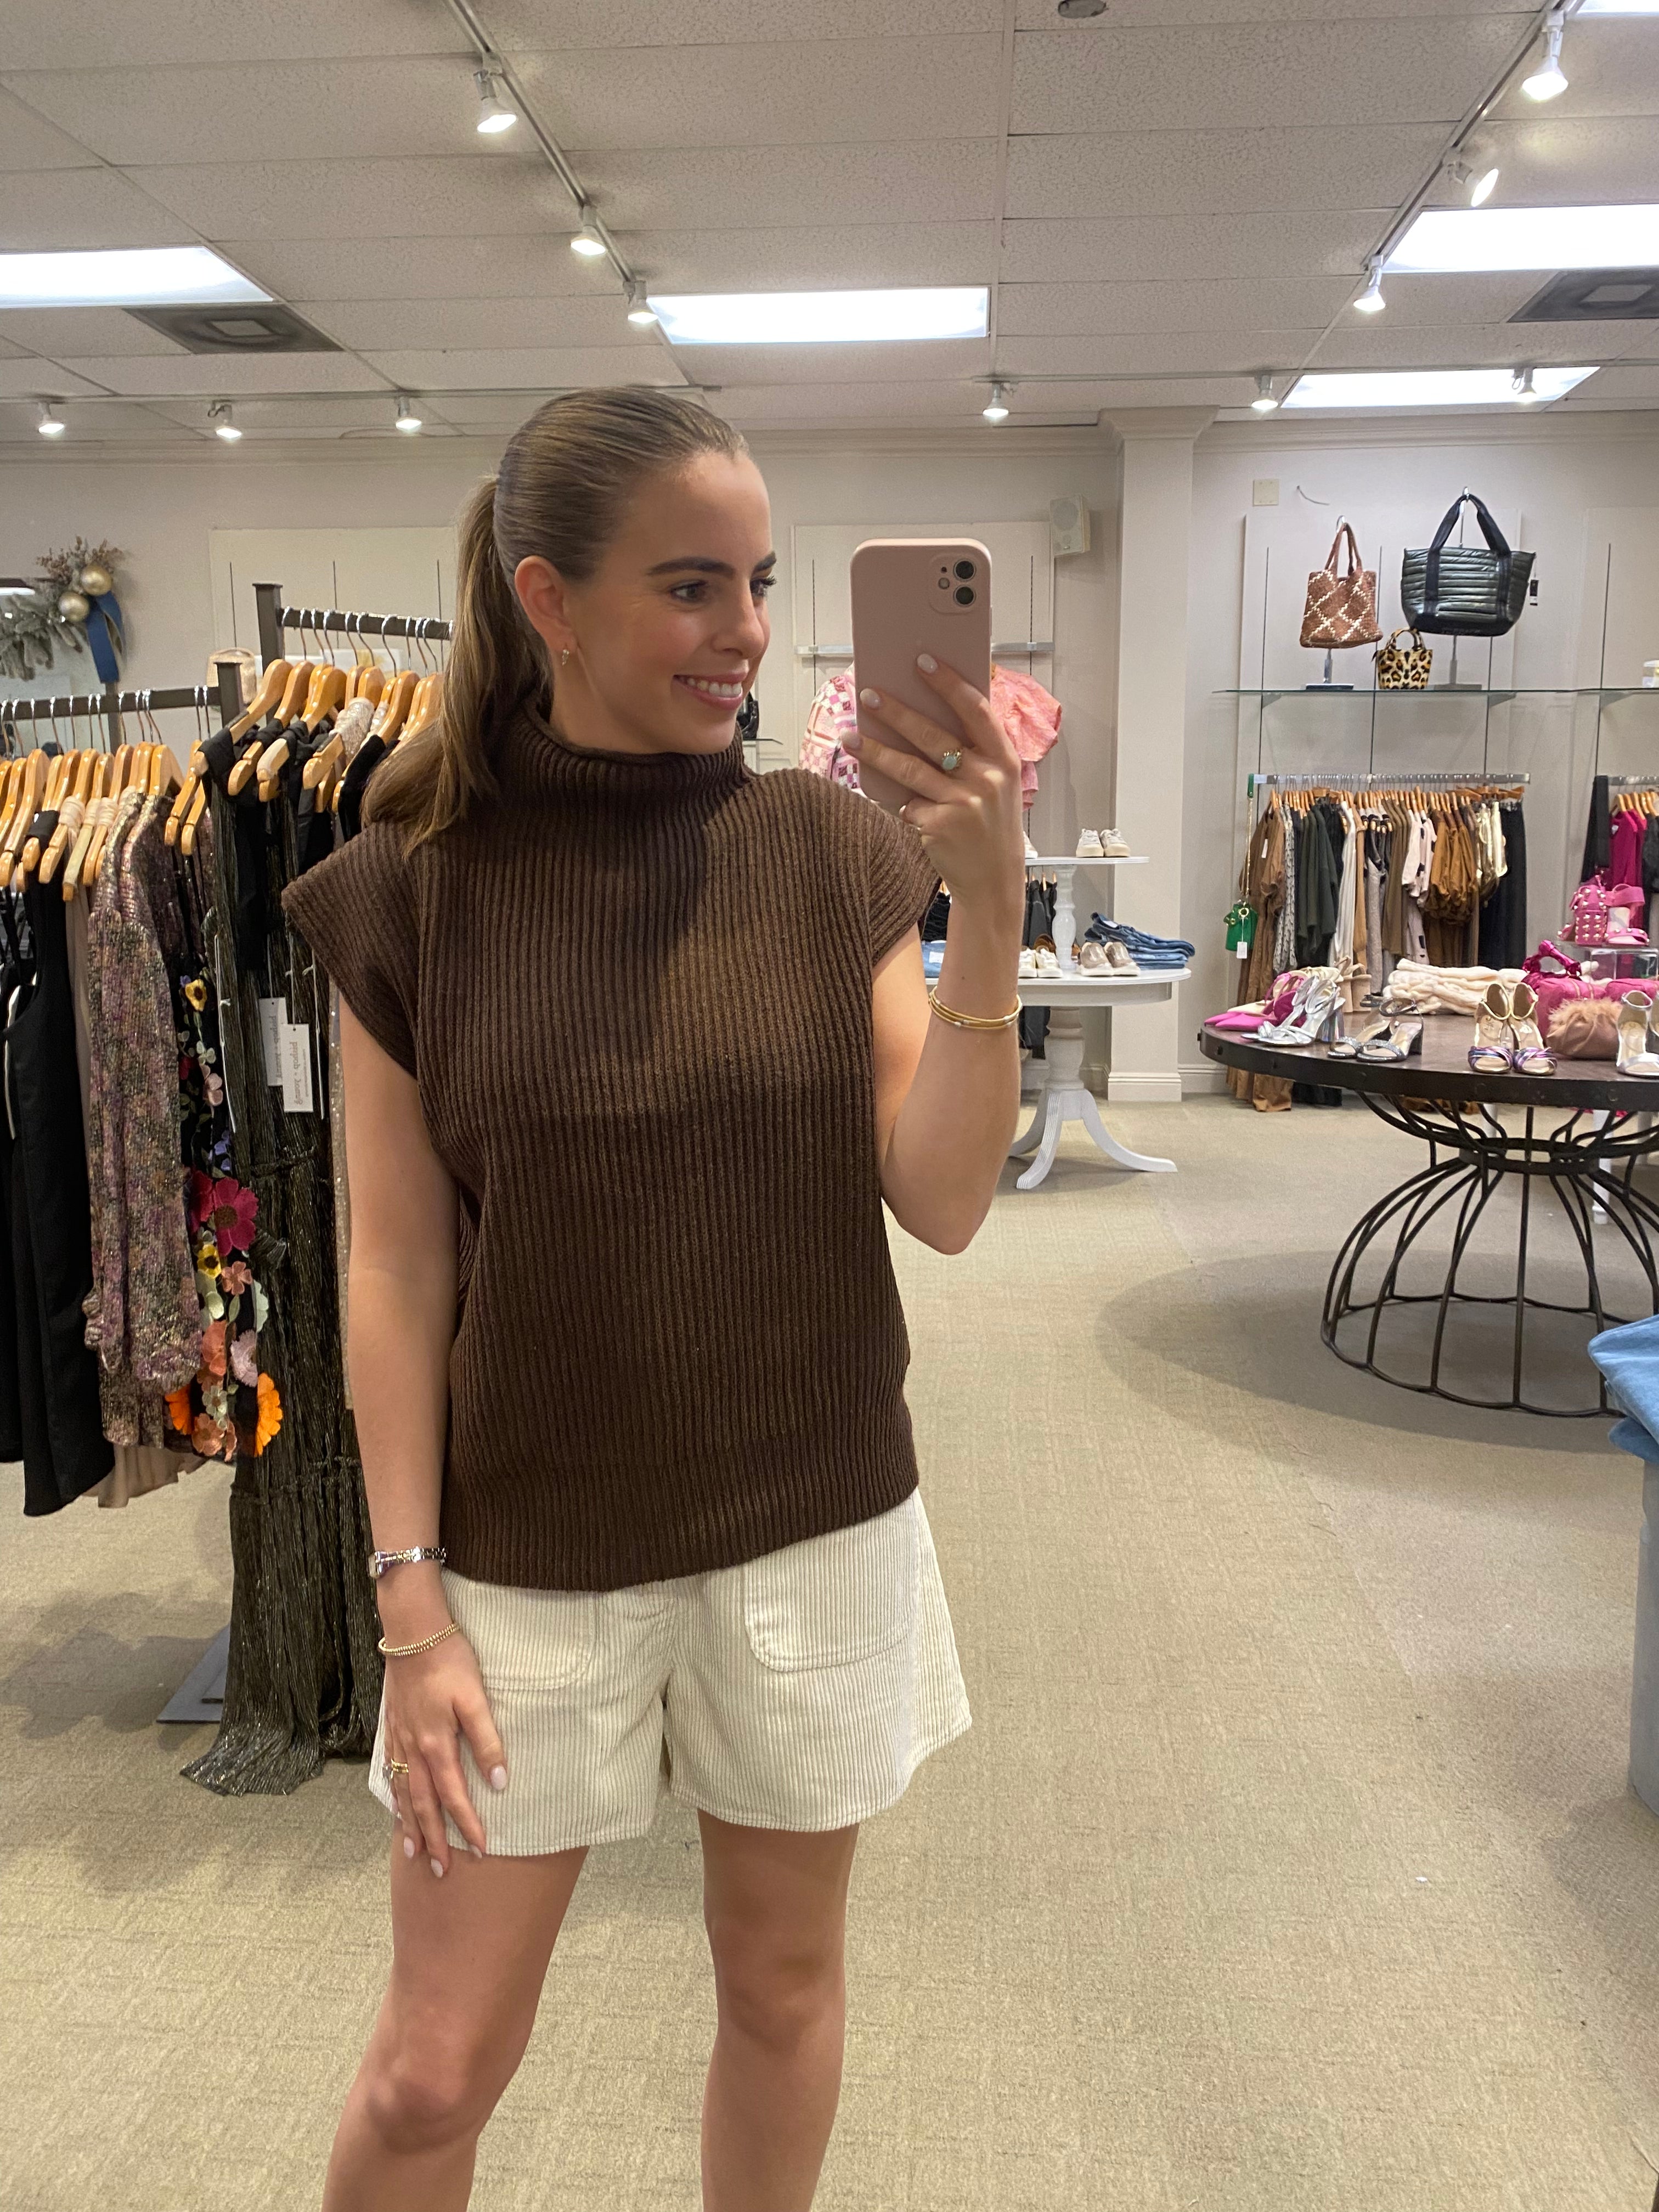 Frances Sweater Brown